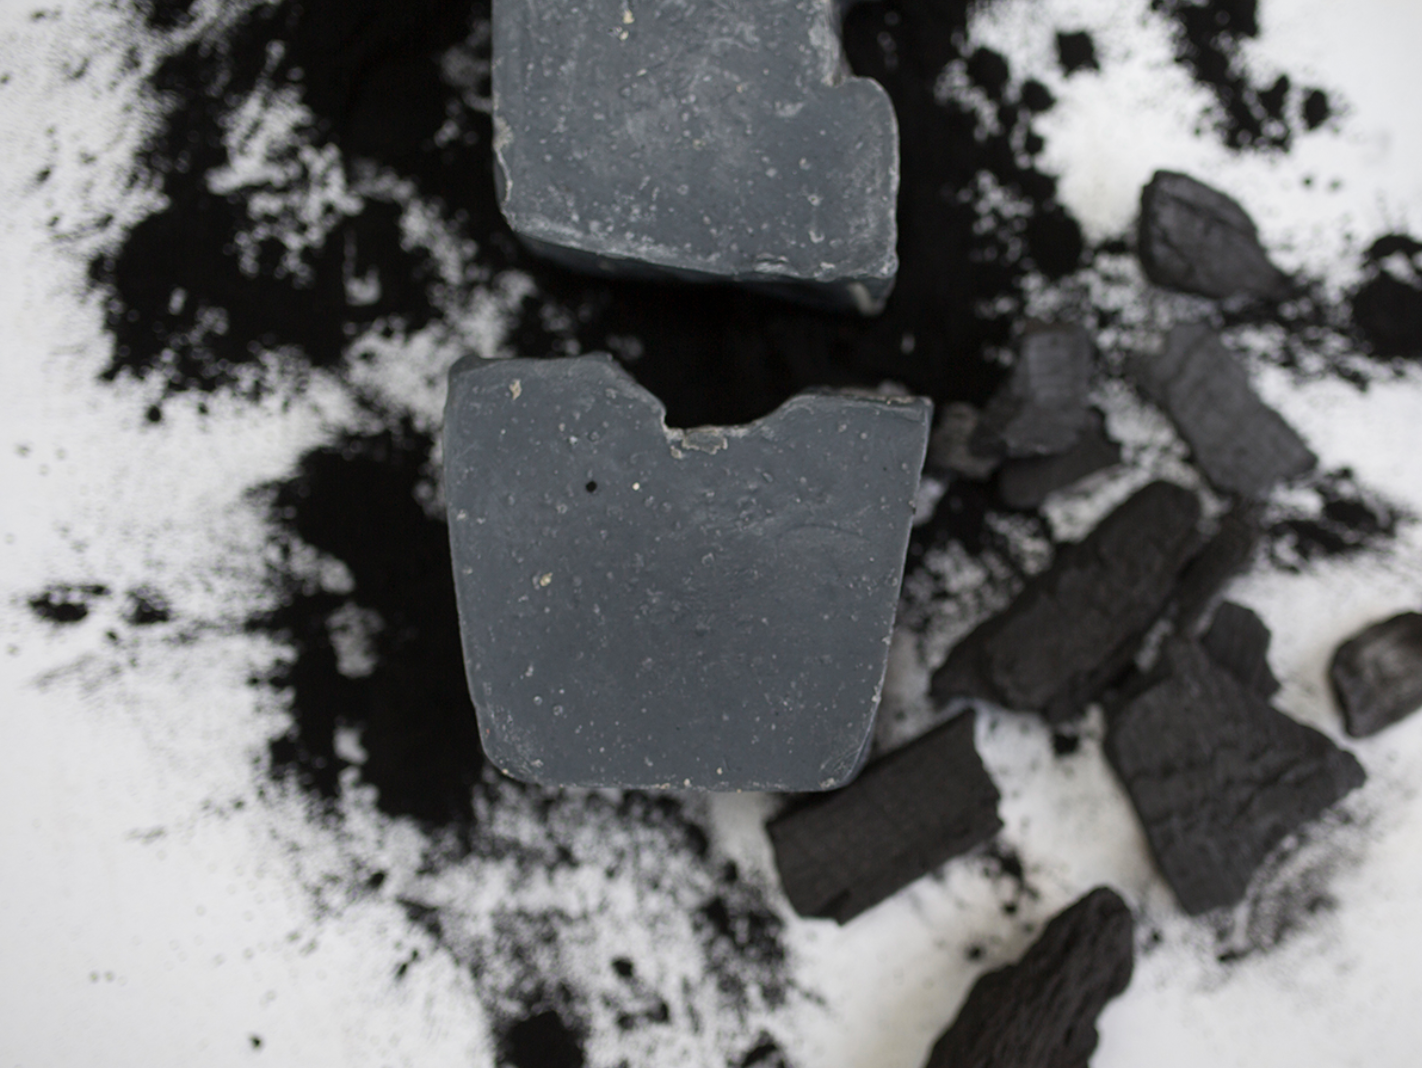 Activated Charcoal Body Soap